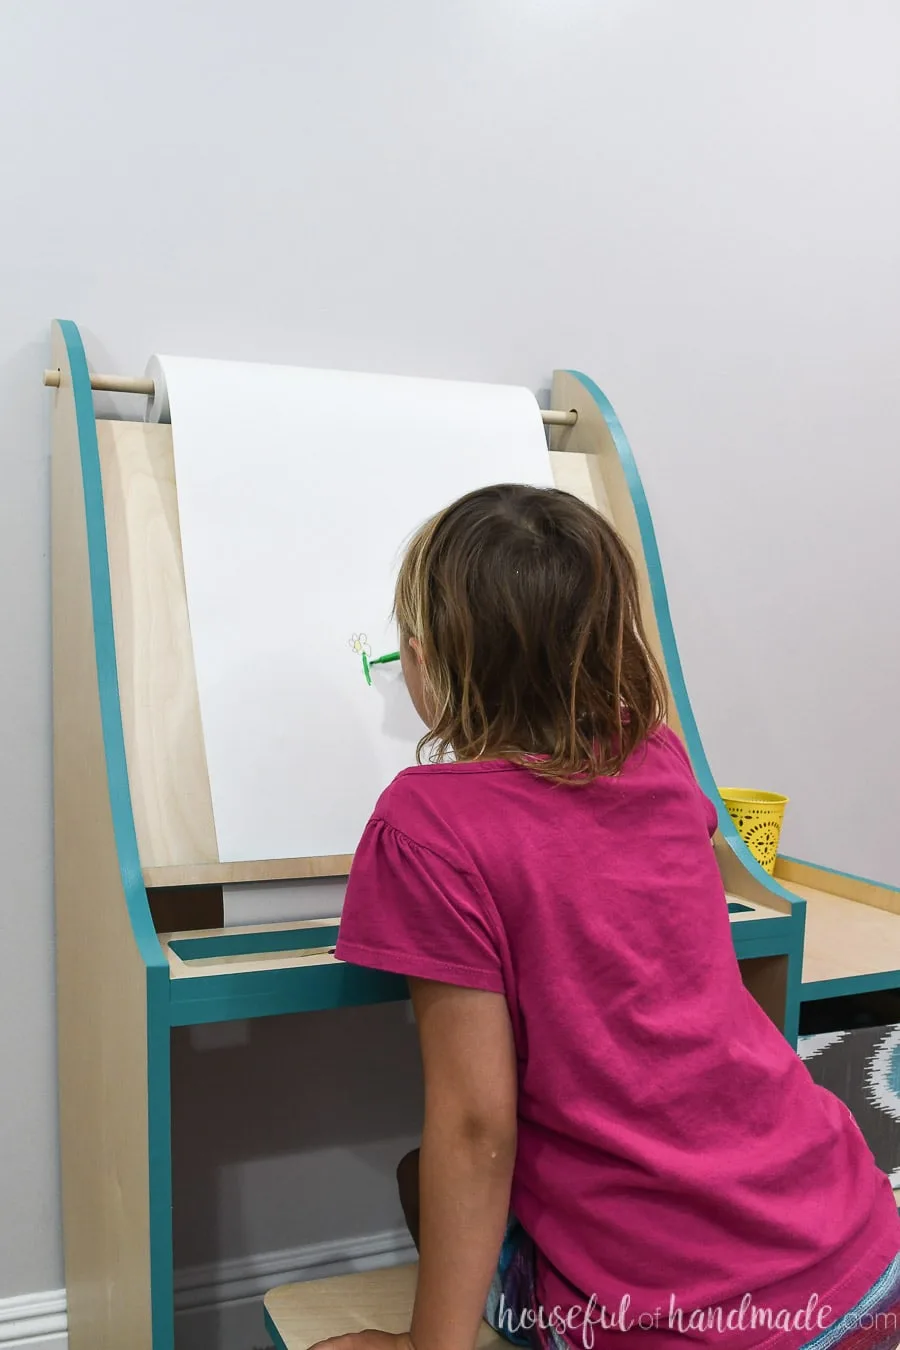 Little girl in pink shirt painting on the DIY art easel using the roll of paper. 